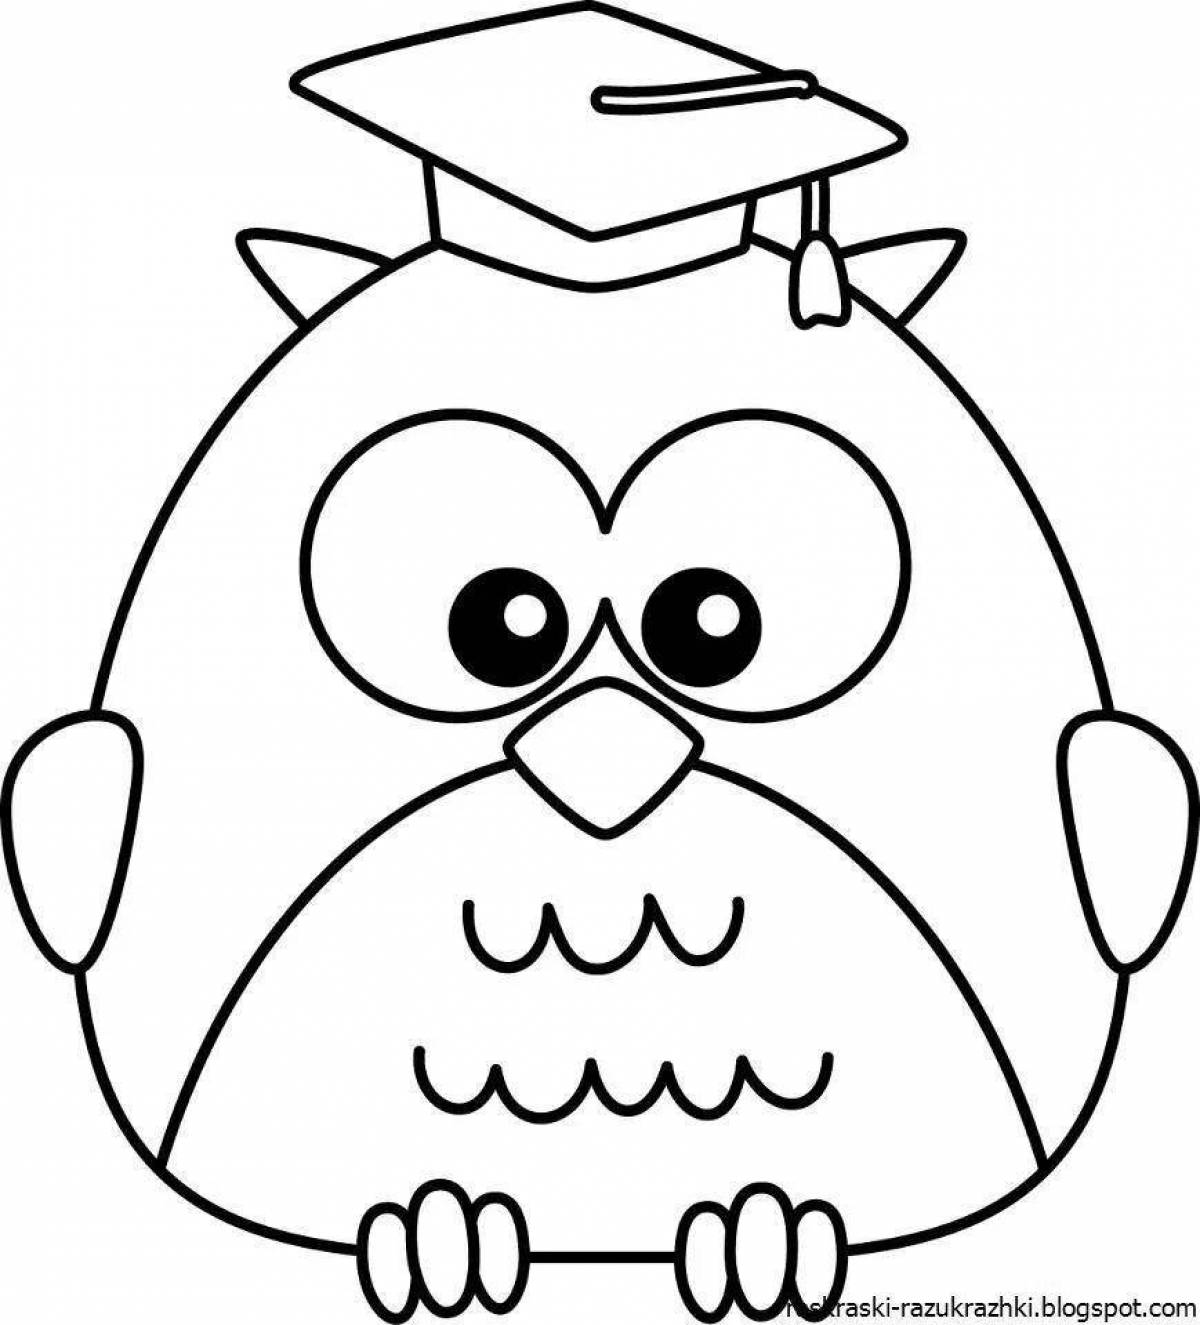 Coloring page magic owl